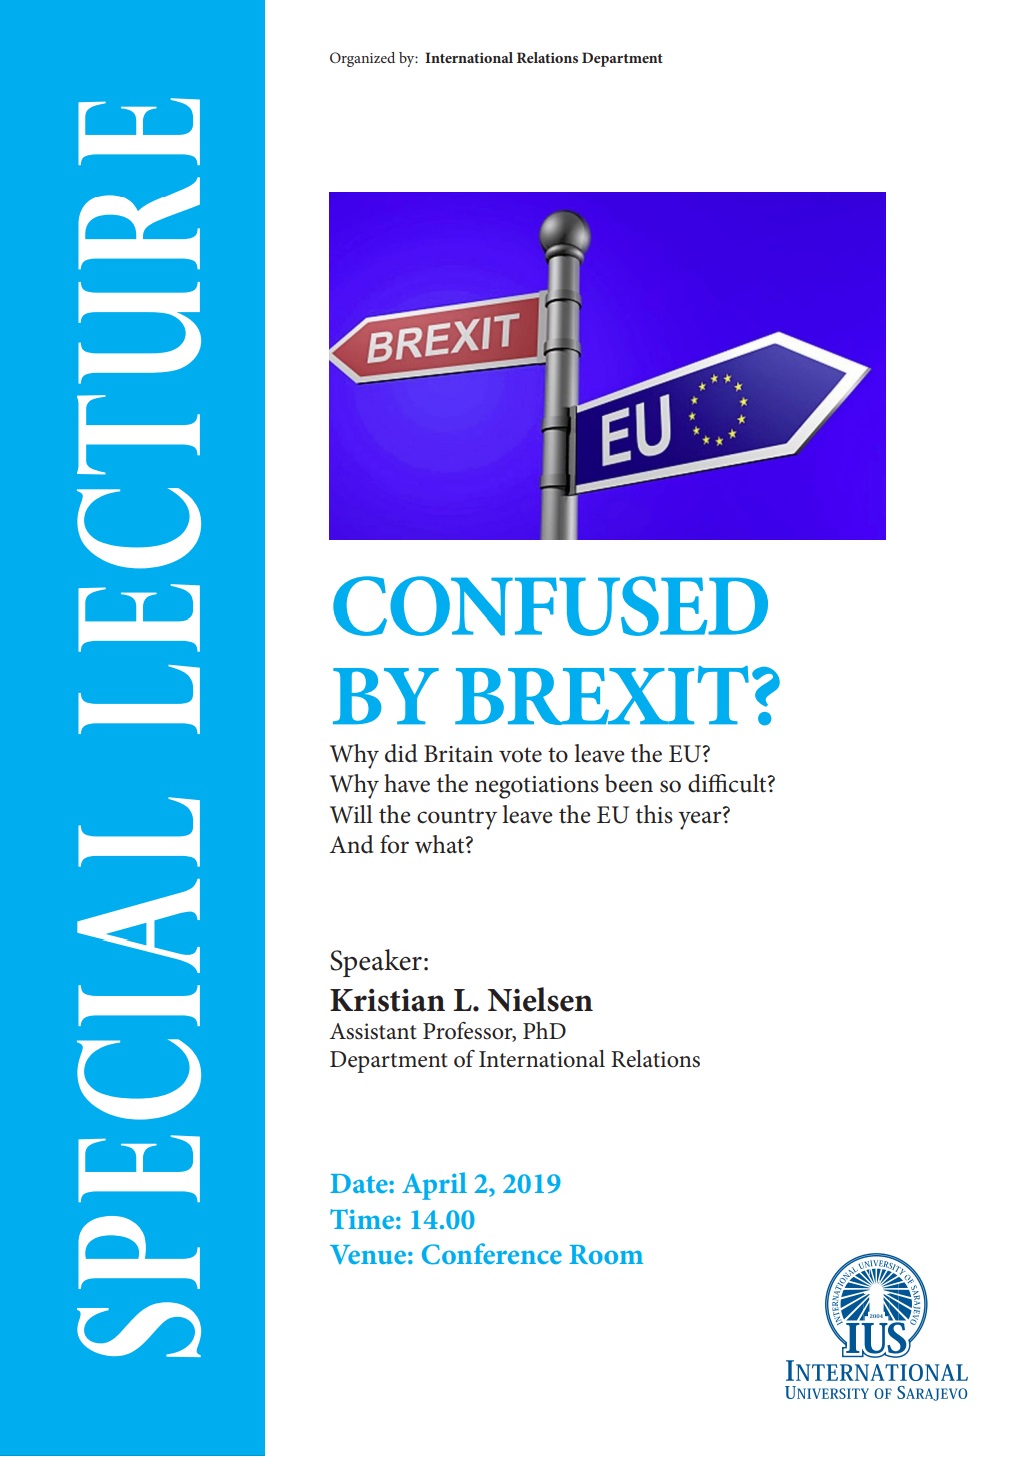  Lecture: "Confused by Brexit?" 